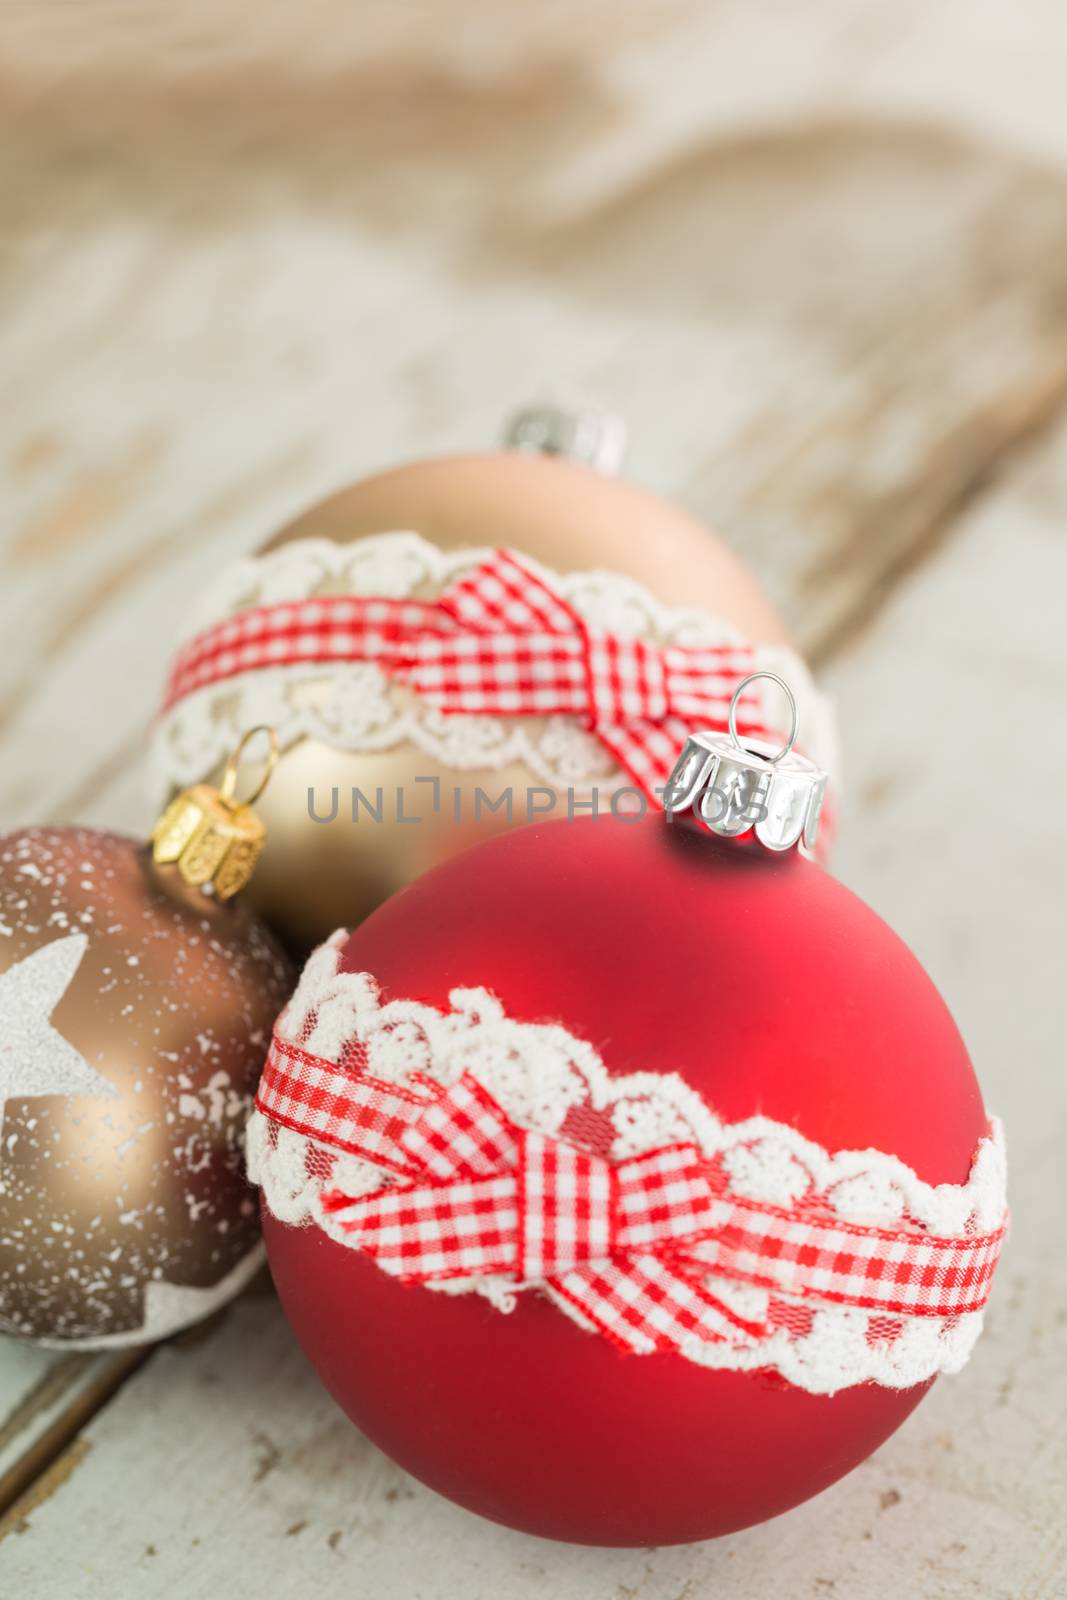 Three colorful decorated Christmas baubles on rustic wood with copy space to celebrate the Xmas holiday season